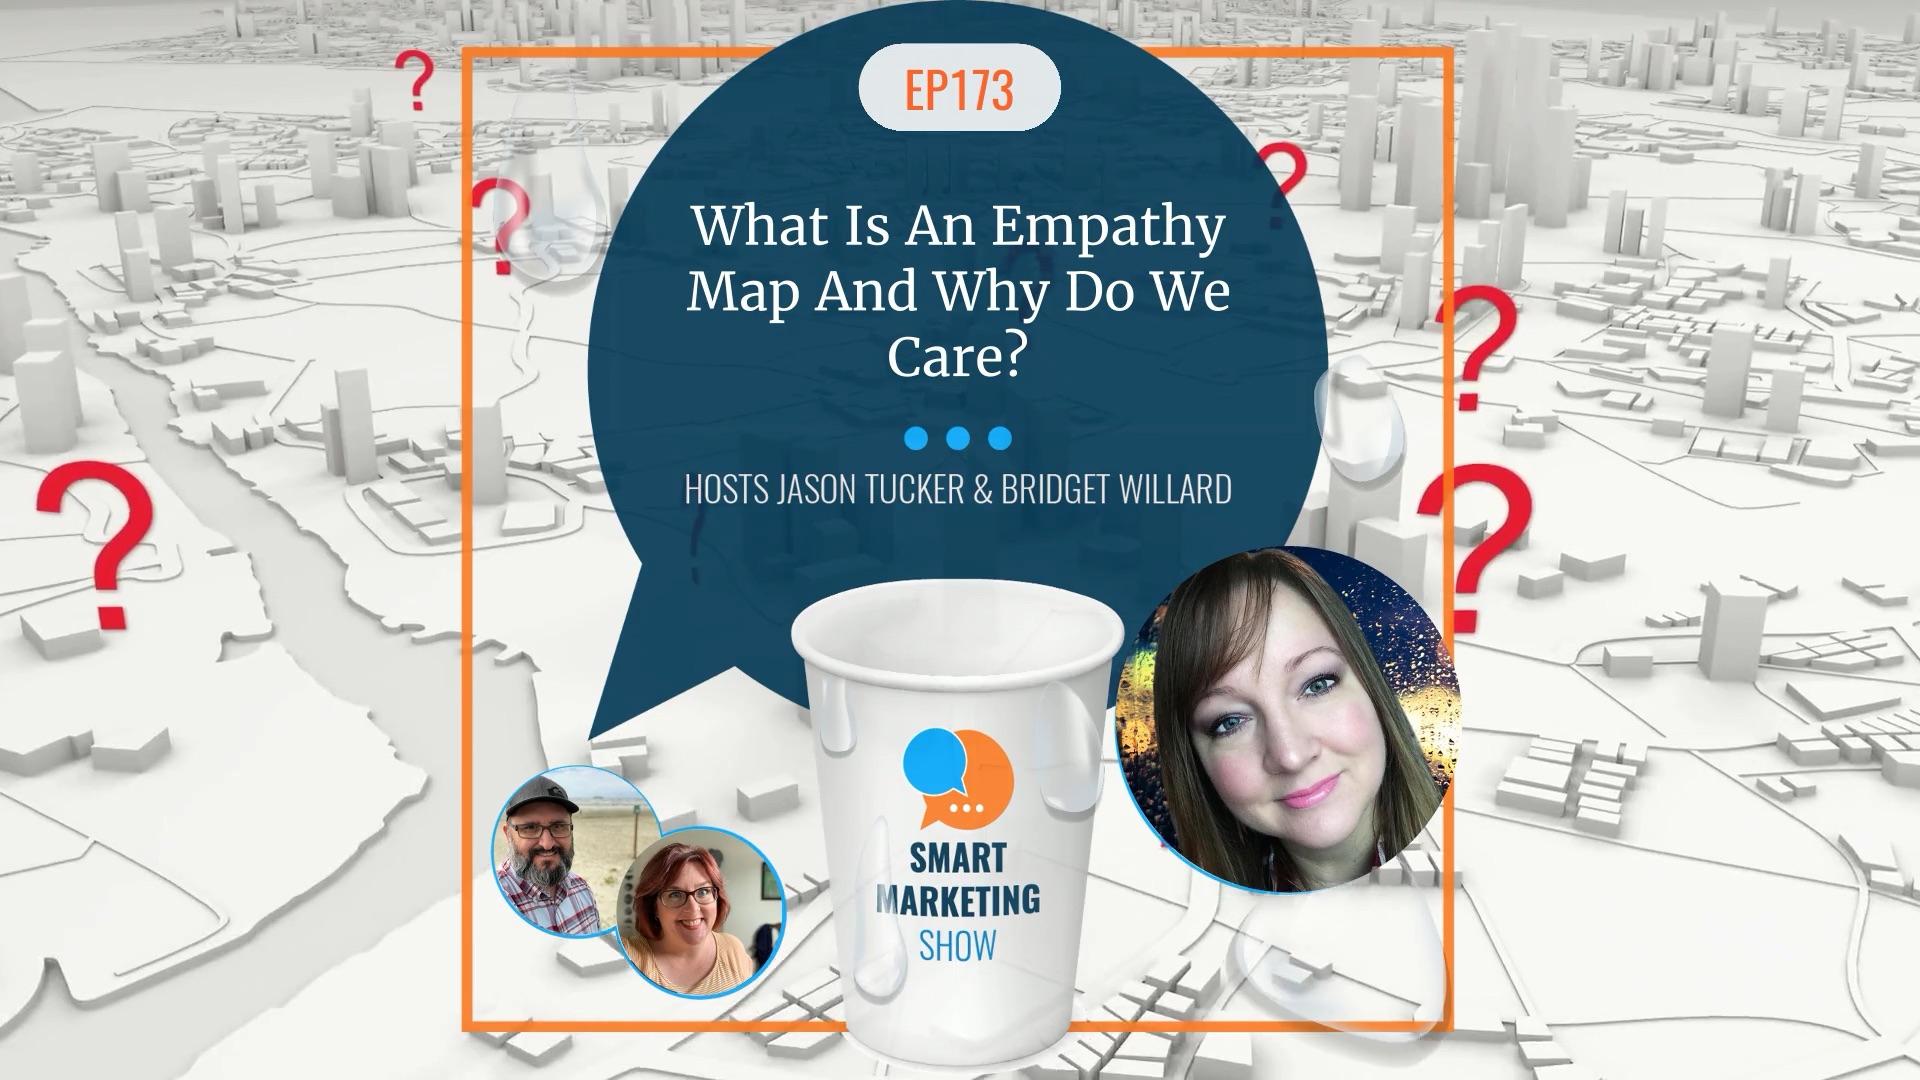 EP173 – What Is An Empathy Map And Why Do We Care